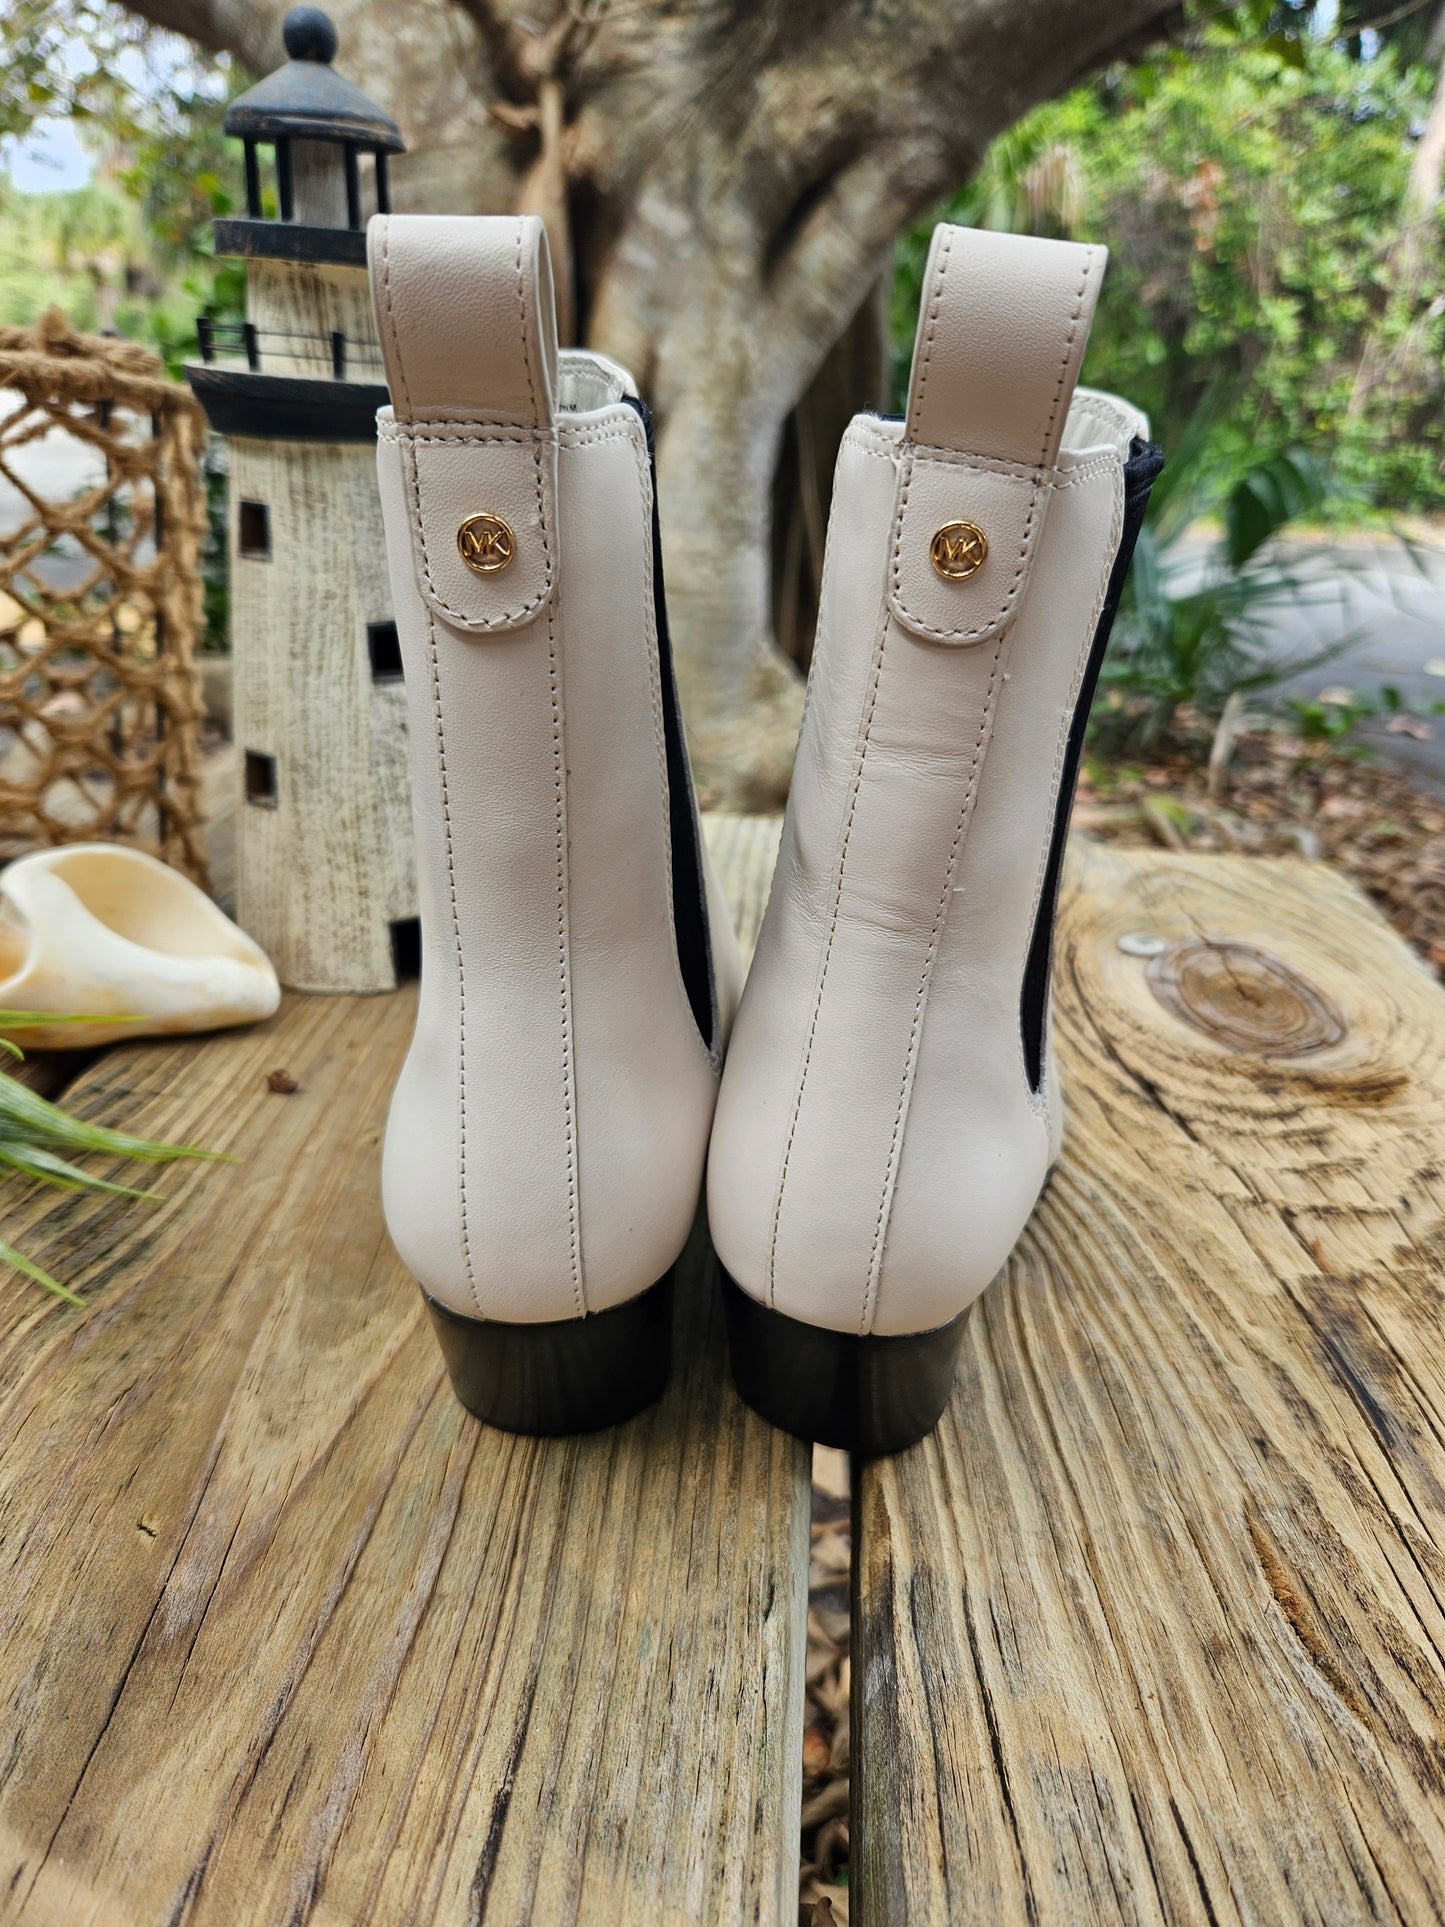 Michael Kors Womens Kinlee Bootie White Leather Size 7.5M - NEW OTHER